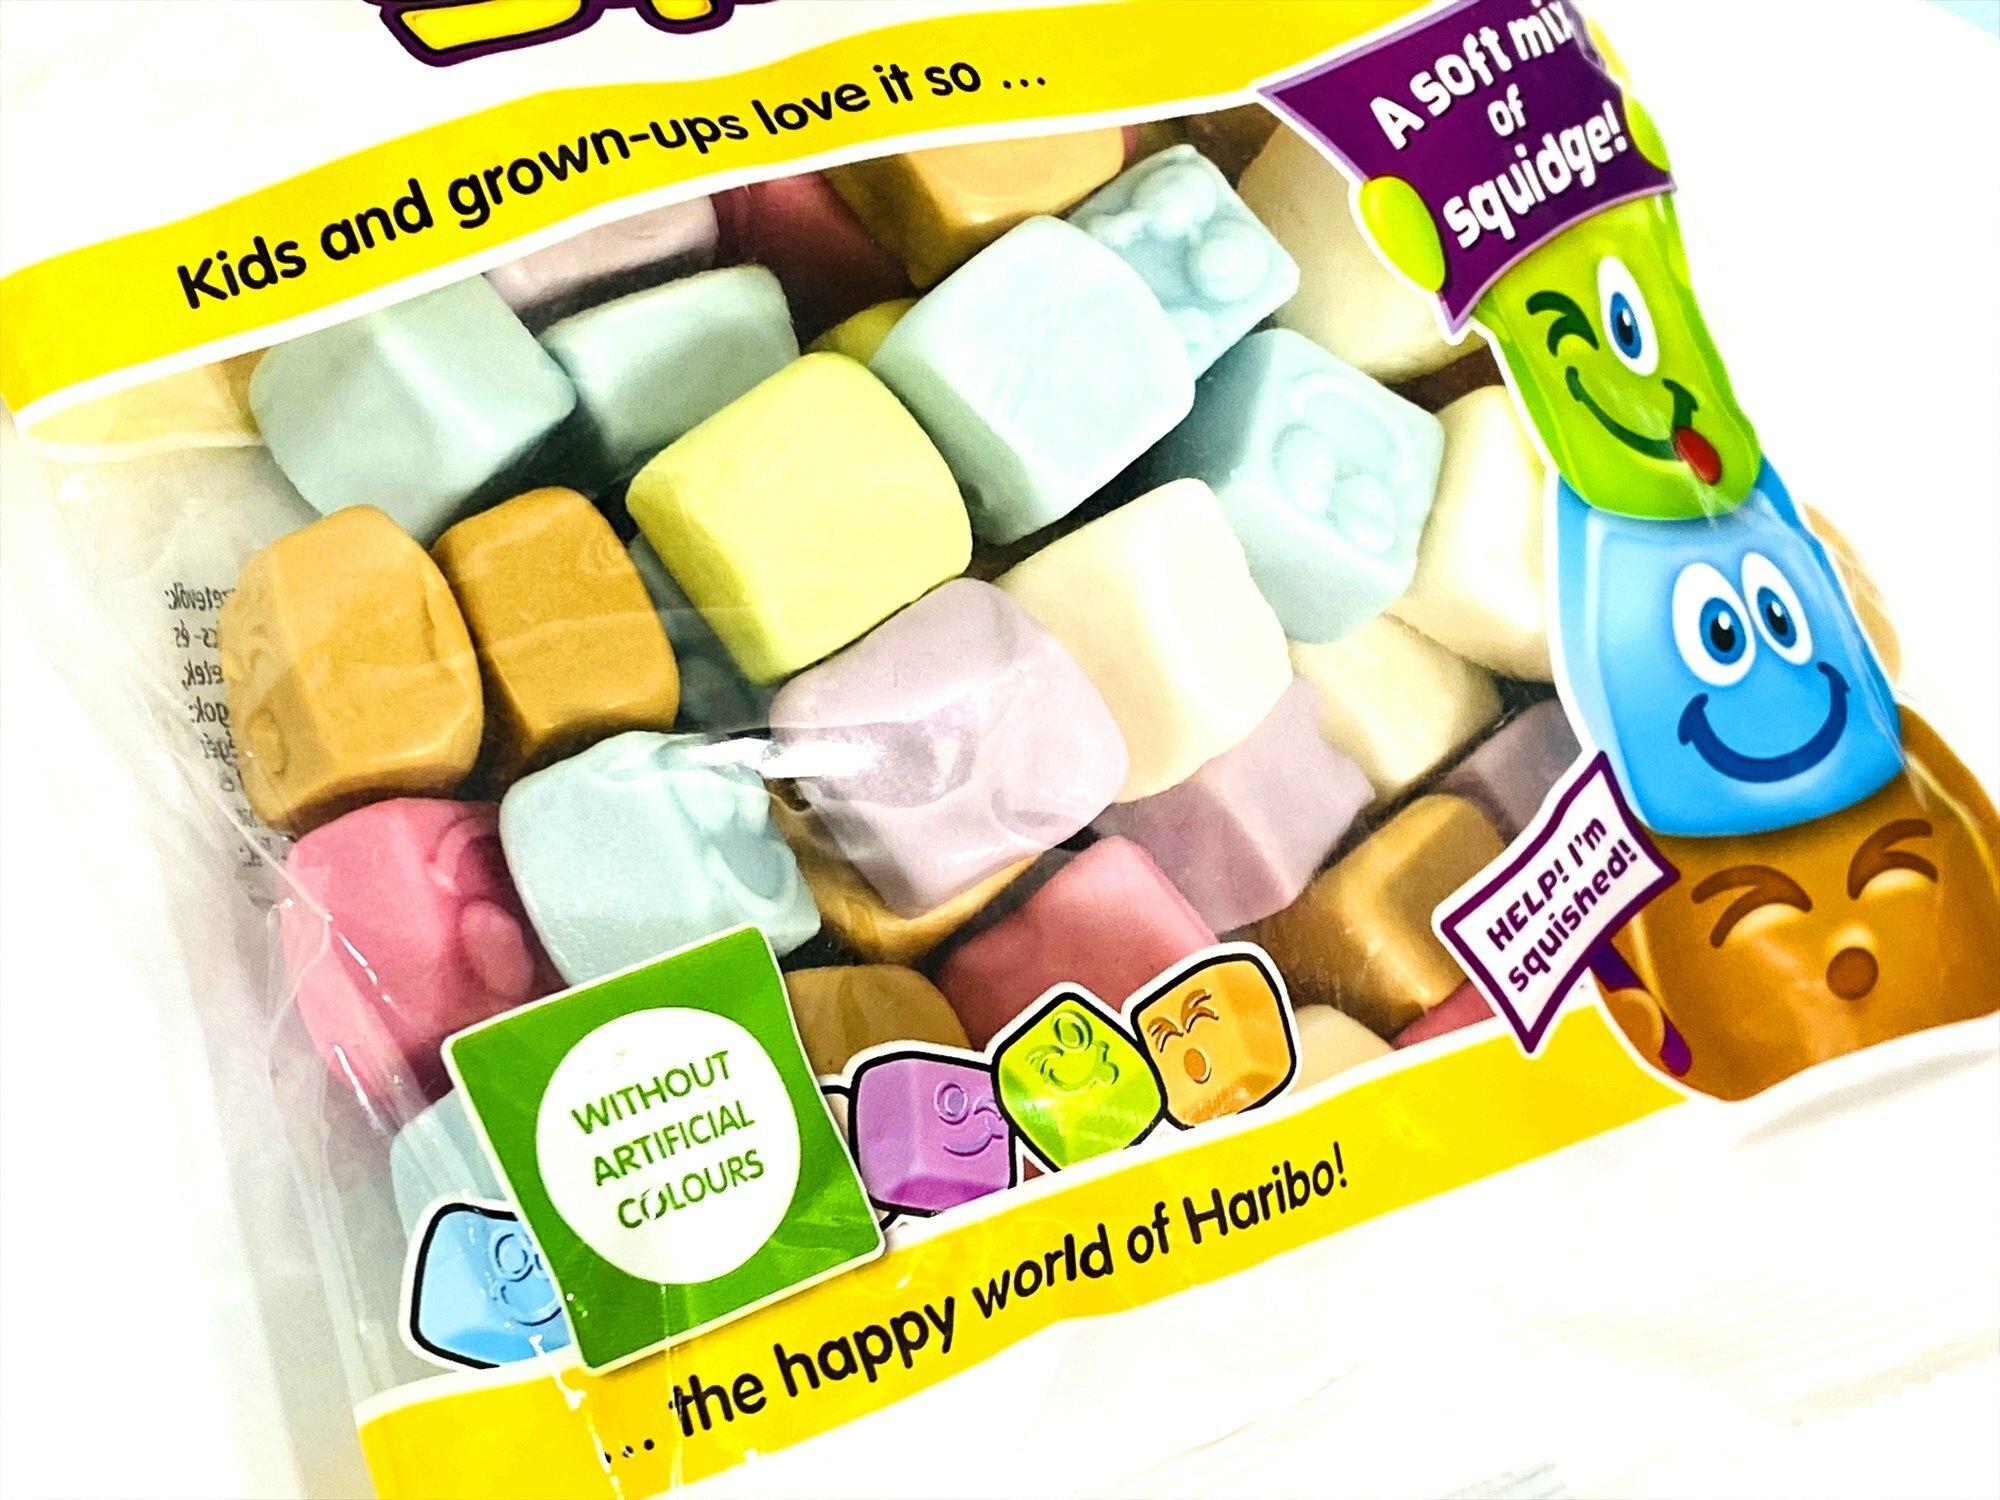 Kids and grown-ups love it so... the happy world of Haribo!（きらきら笑顔、みんなでハリボー！）